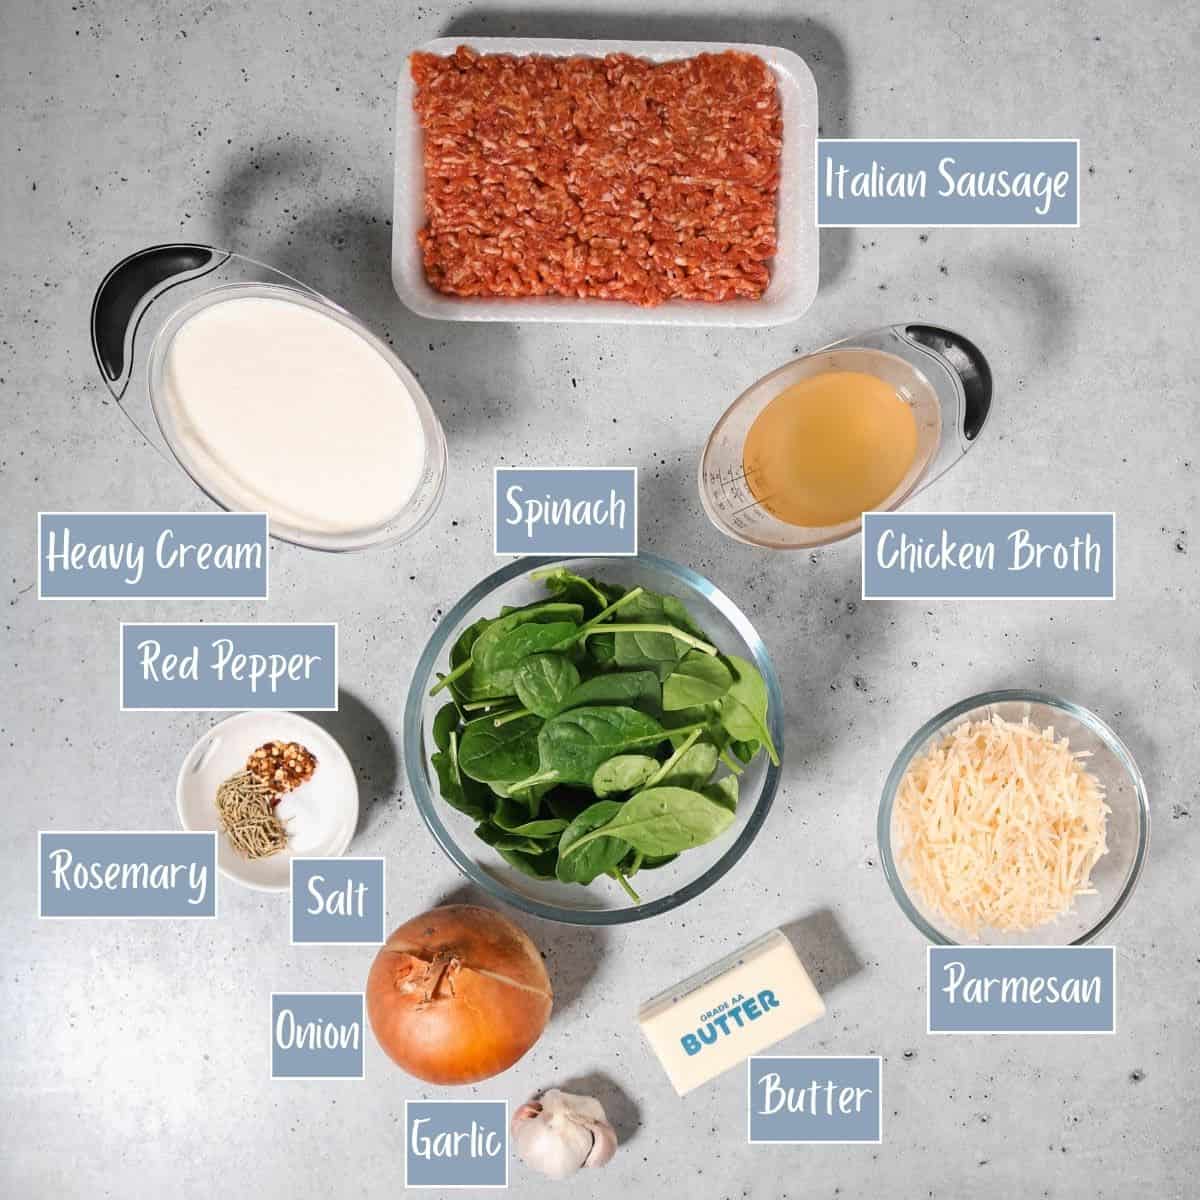 Labeled ingredients for Italian sausage cream sauce with spinach.